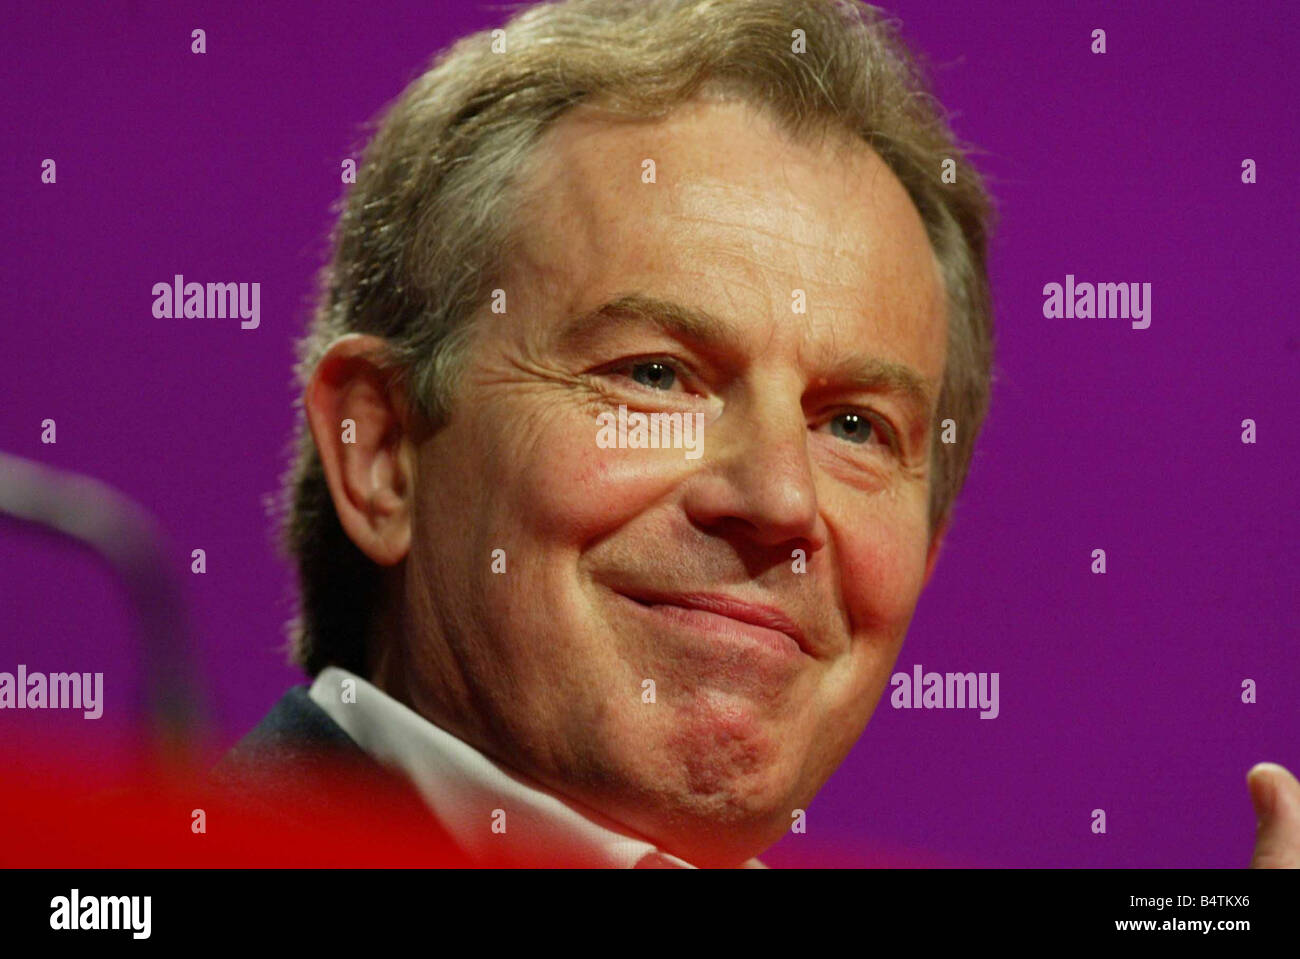 Prime Minister Tony Blair and Chancellor Gordon Brown at a Labour Party rally at the Old Vic theatre in London on 24th April 2005 The conference was addressed by former U S President Bill Clinton via a link from the USA 2000s mirrorpix Stock Photo